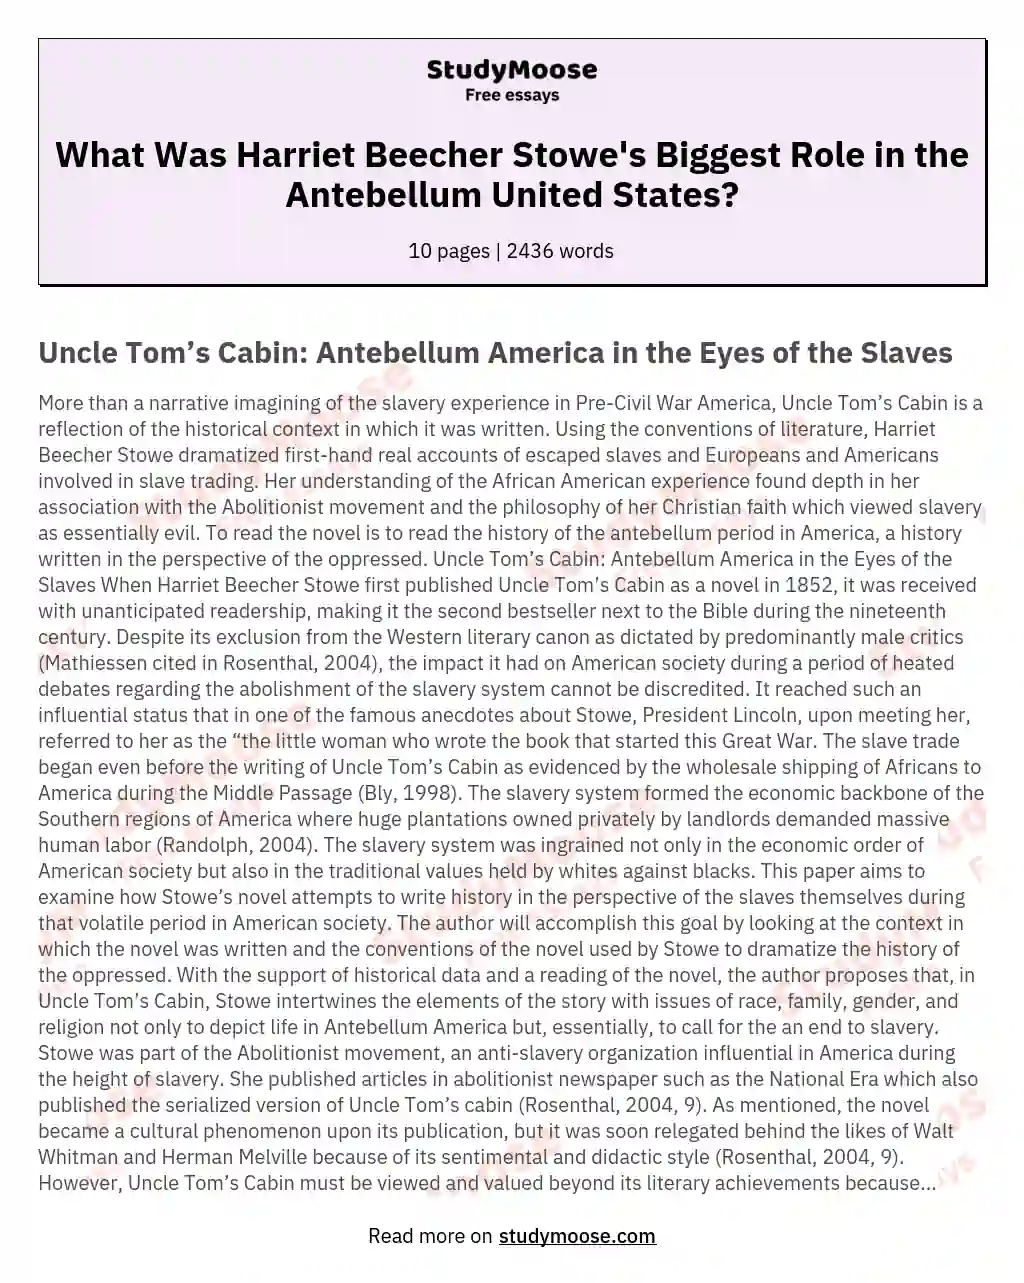 What Was Harriet Beecher Stowe's Biggest Role in the Antebellum United States? essay